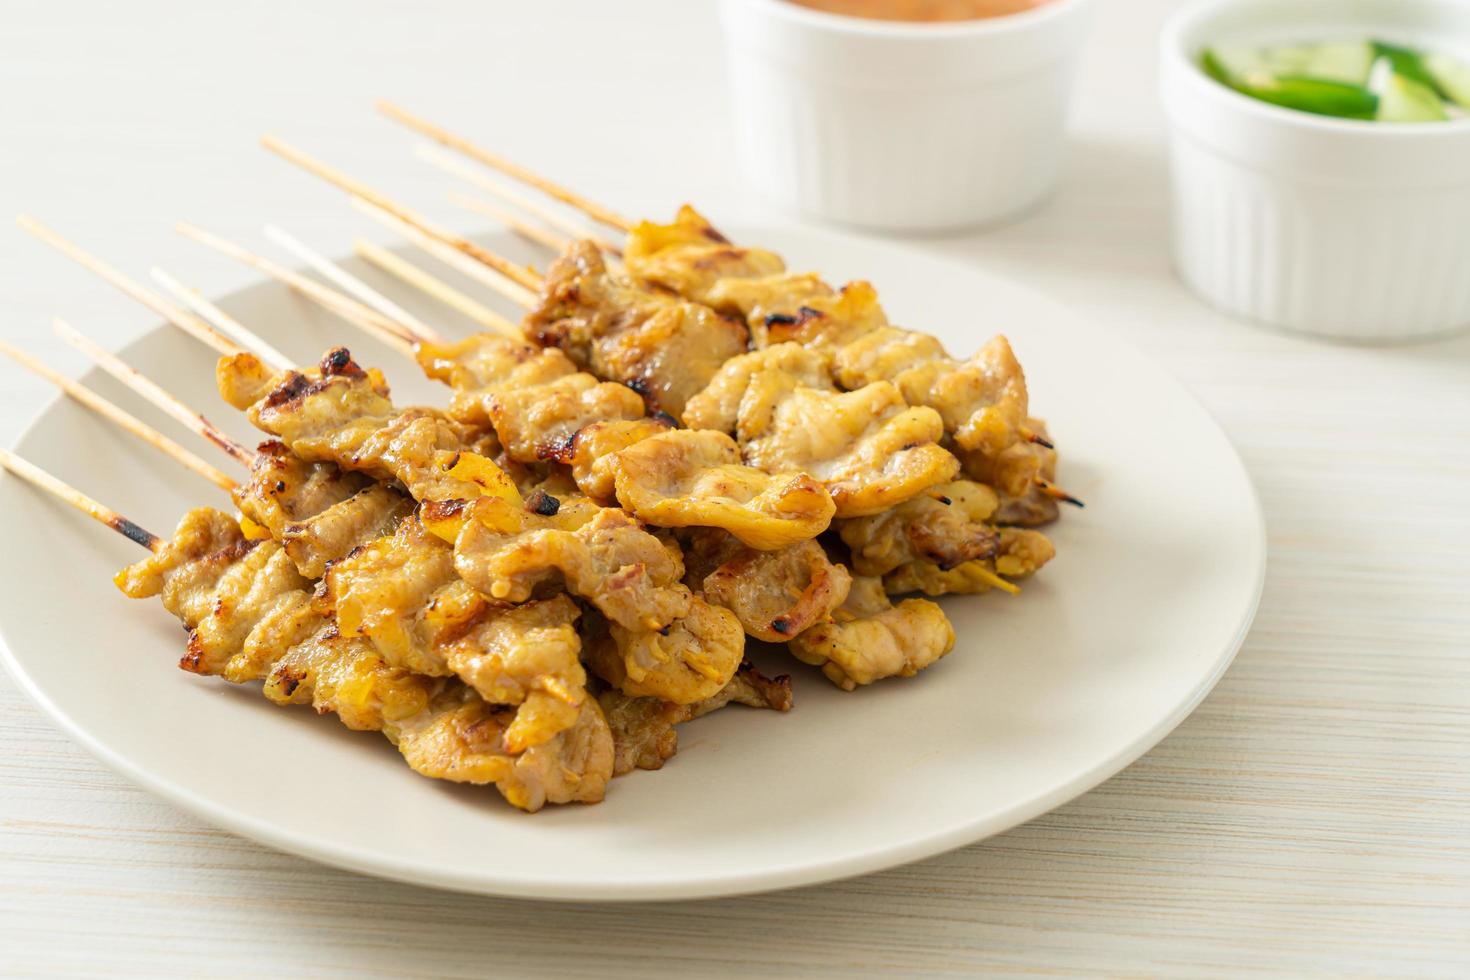 Pork satay with peanut sauce pickles which are cucumber slices and onions in vinegar photo